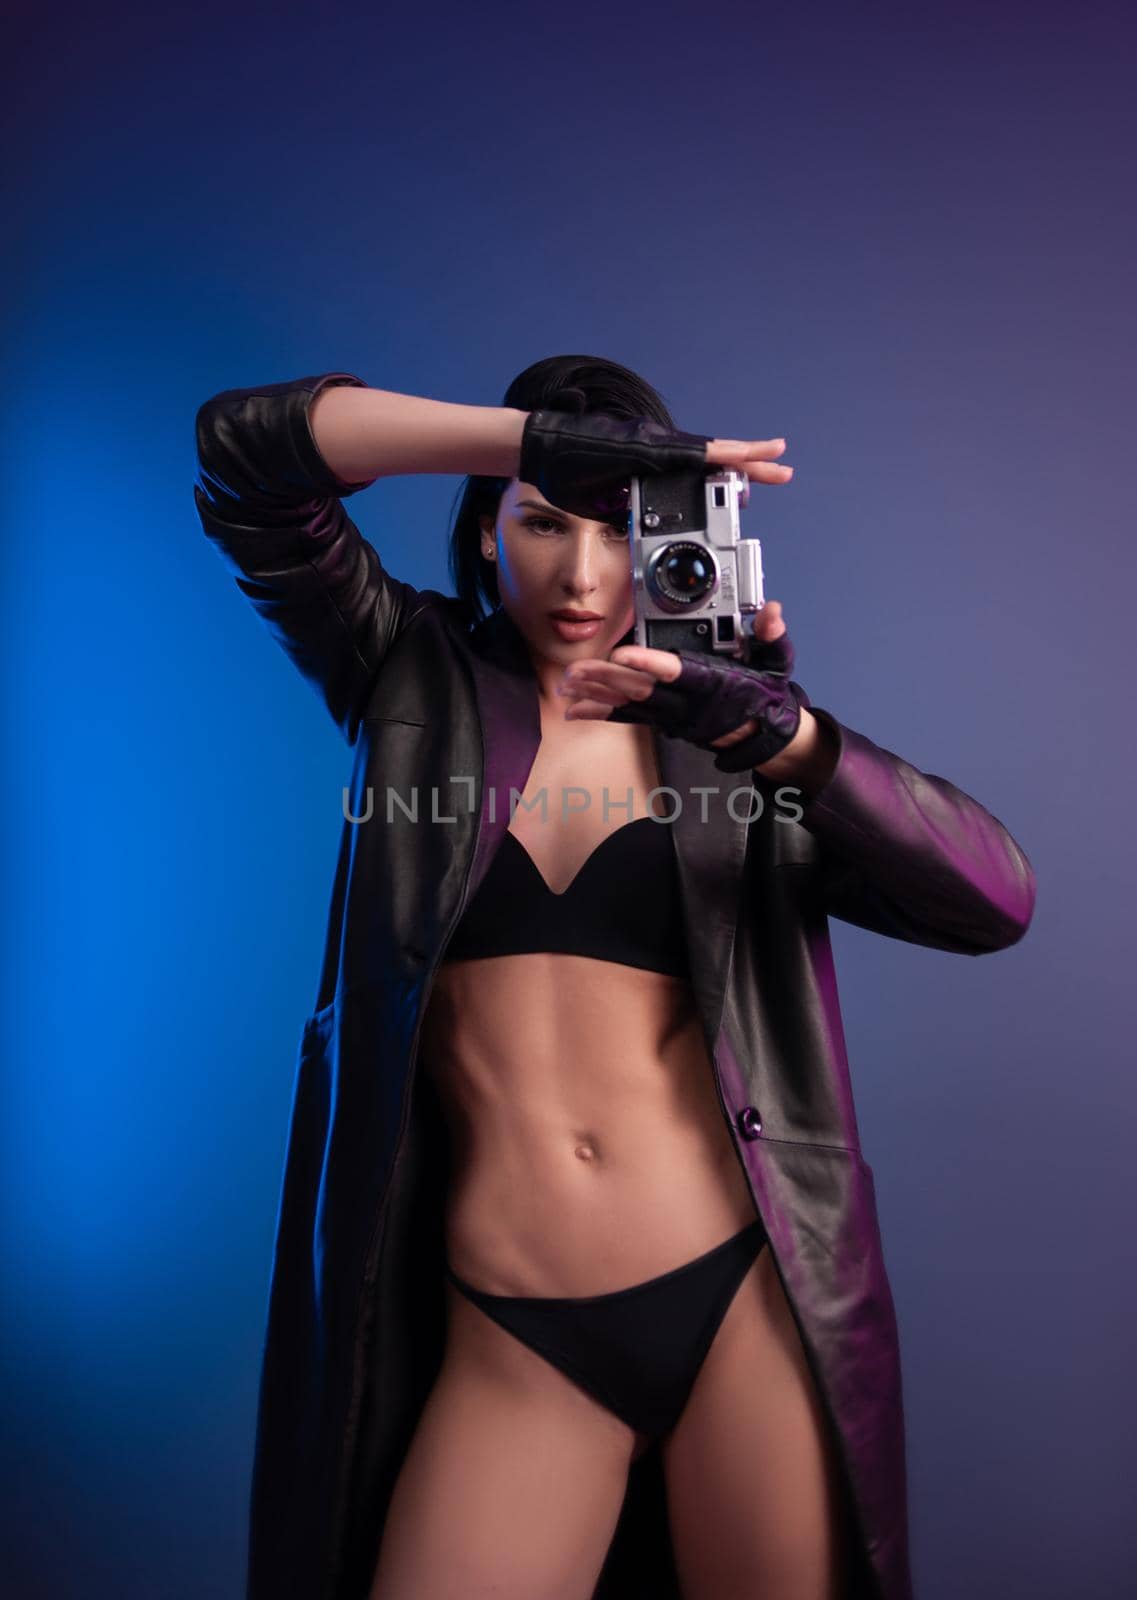 the brunette photographer girl in underwear and a leather raincoat poses in a photo studio with a camera